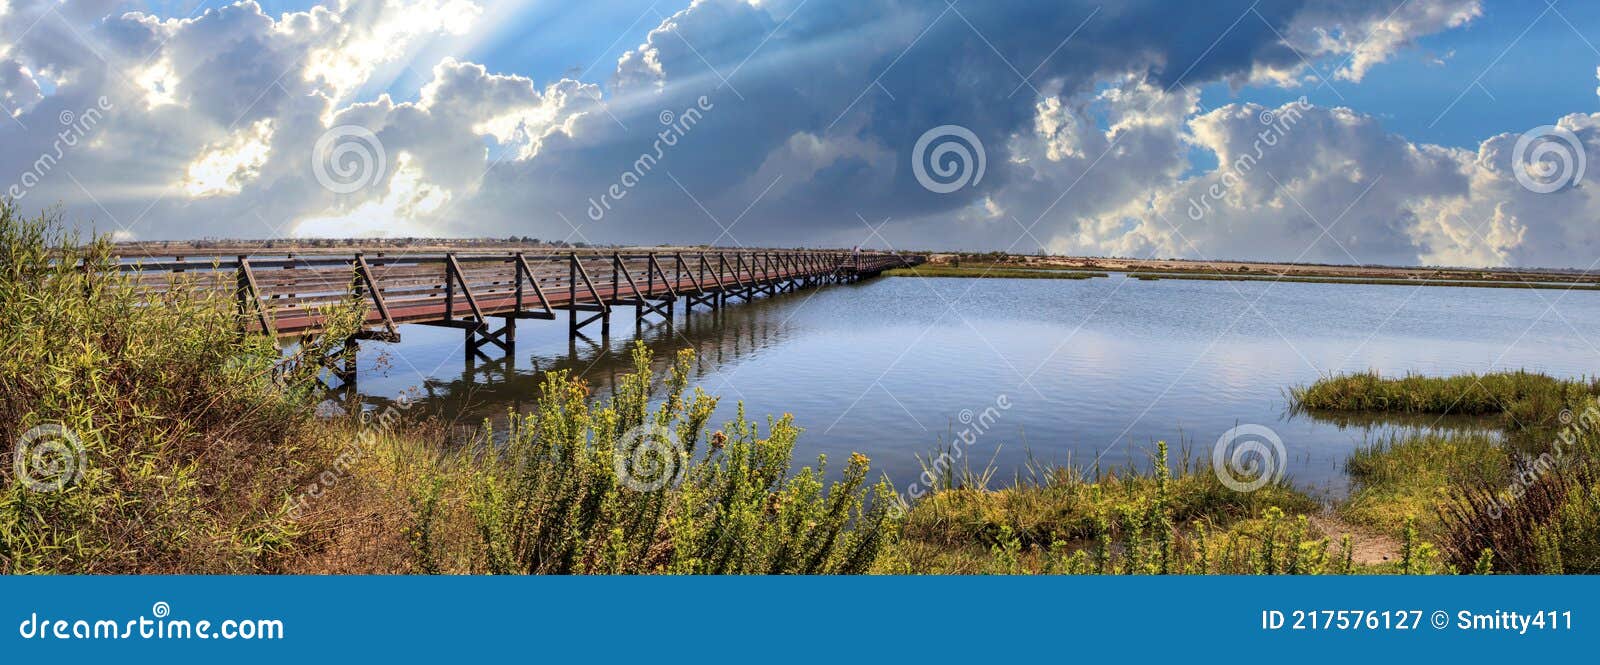 bridge along the peaceful and tranquil marsh of bolsa chica wetlands